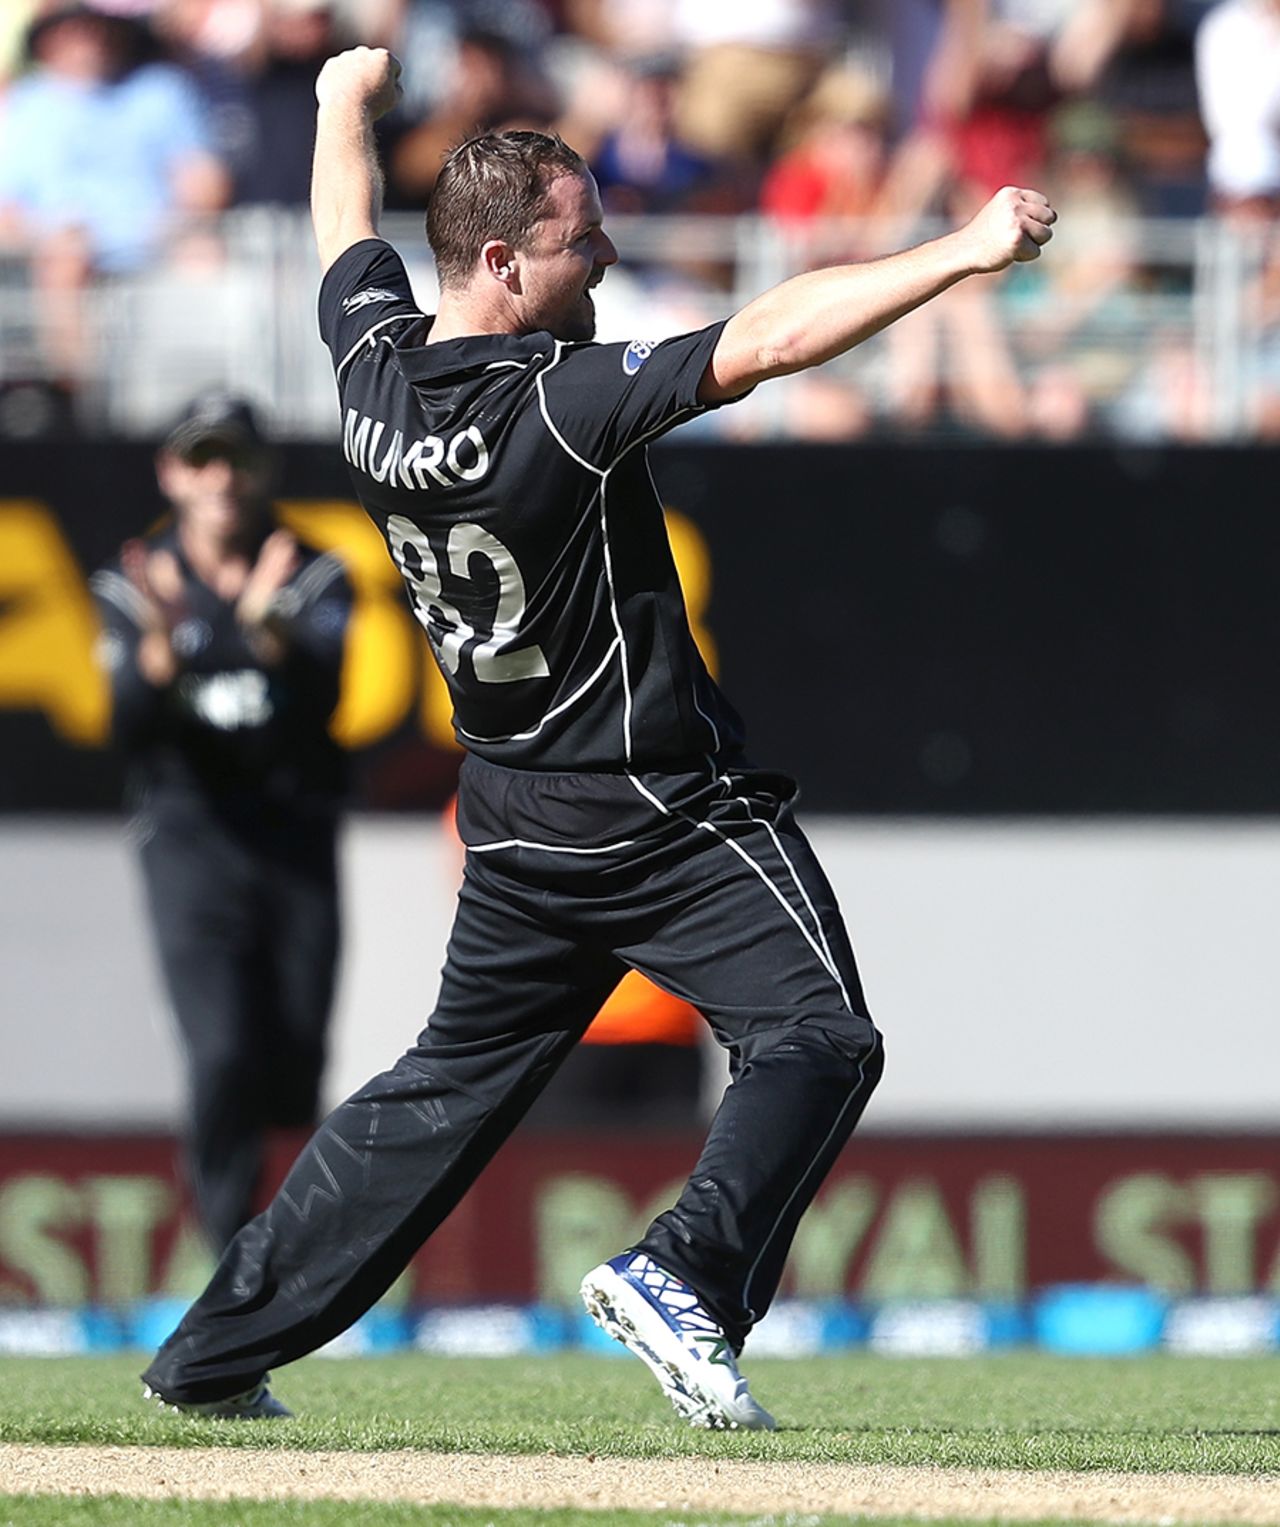 Colin Munro is thrilled after dismissing James Faulkner for his first ODI wicket, New Zealand v Australia, 1st ODI, Auckland, January 30, 2017